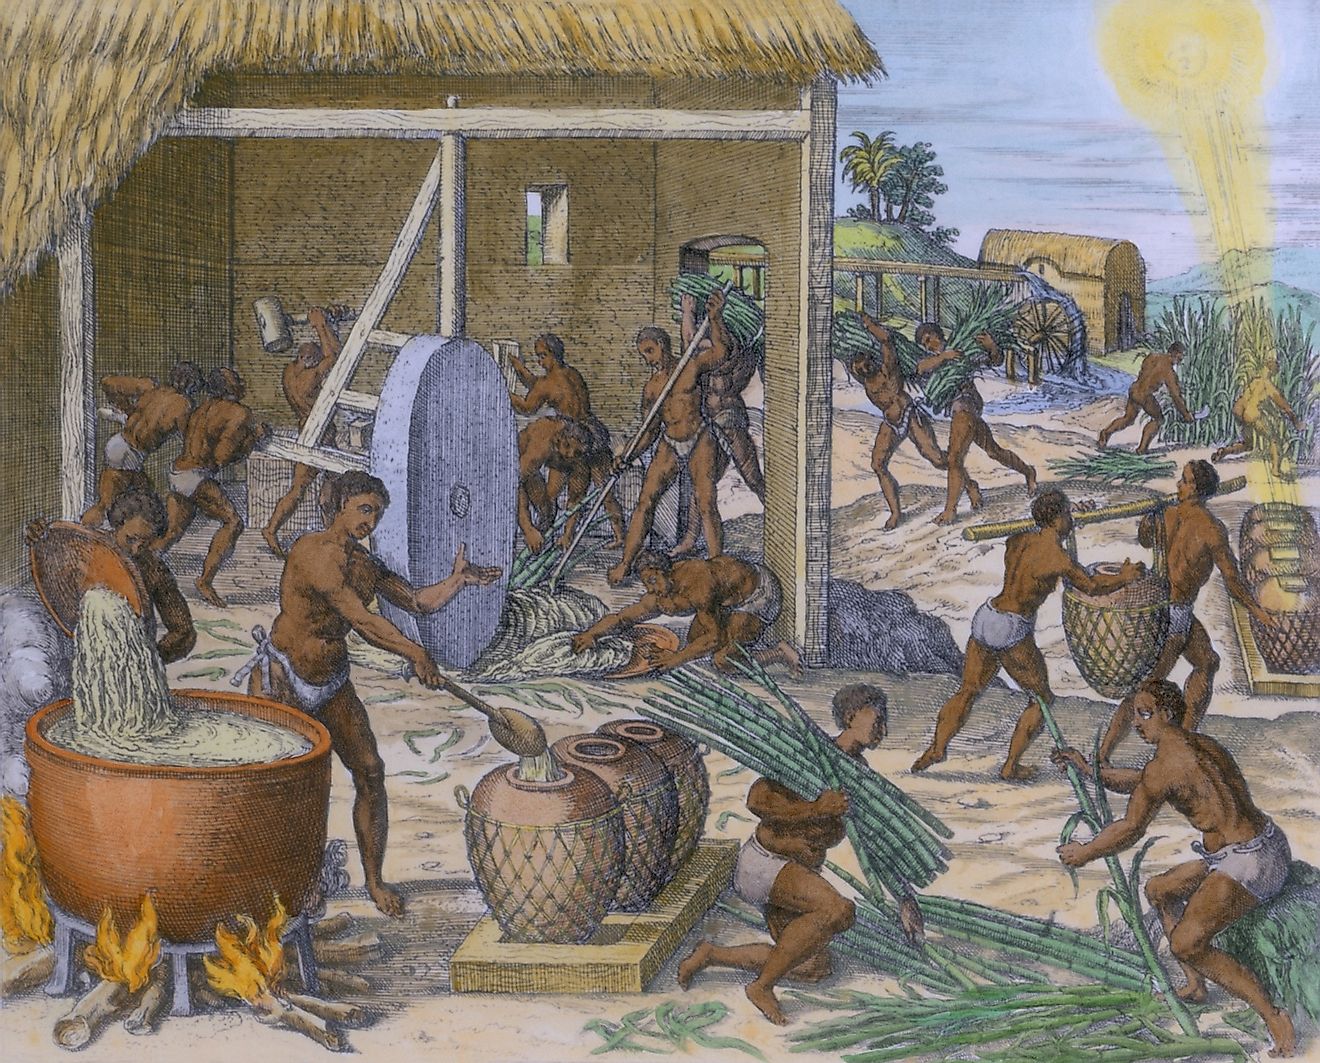 African slaves processing sugar cane on the Caribbean island of Hispaniola, 1595 engraving by Theodor de Bry with modern watercolor. Image credit: Everett Historical/Shutterstock.com